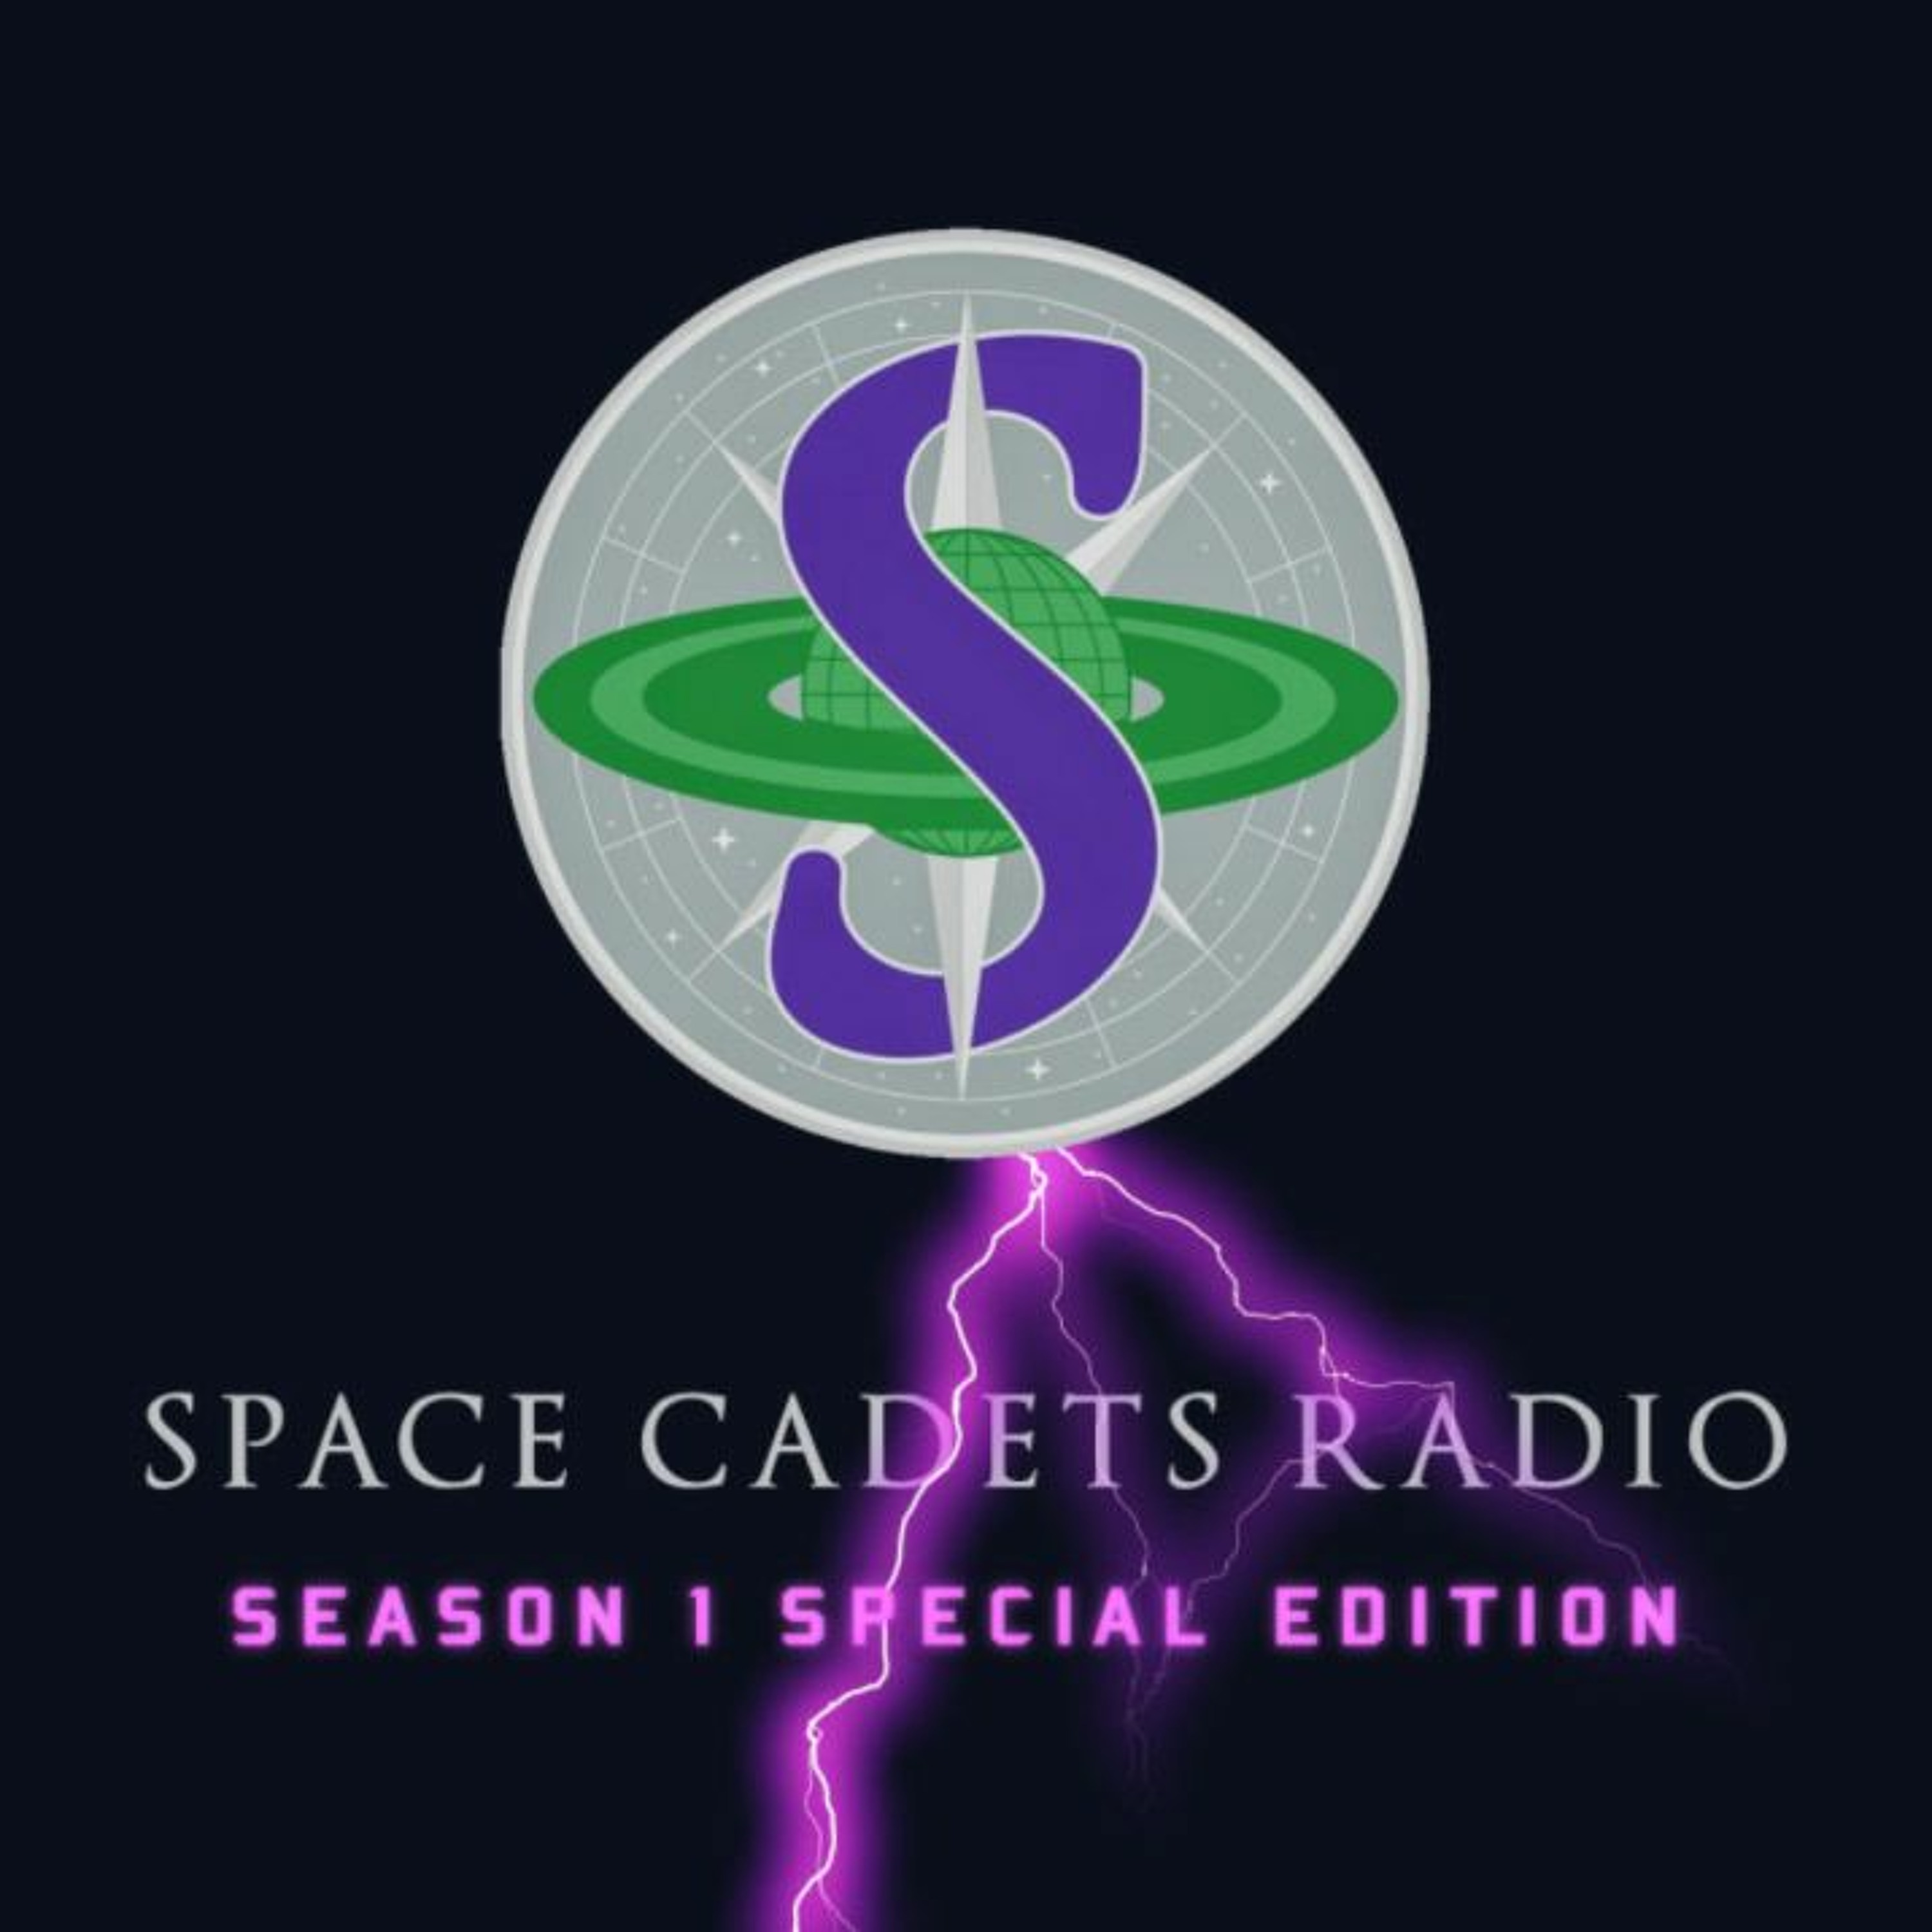 "Space Cadets Radio" Podcast